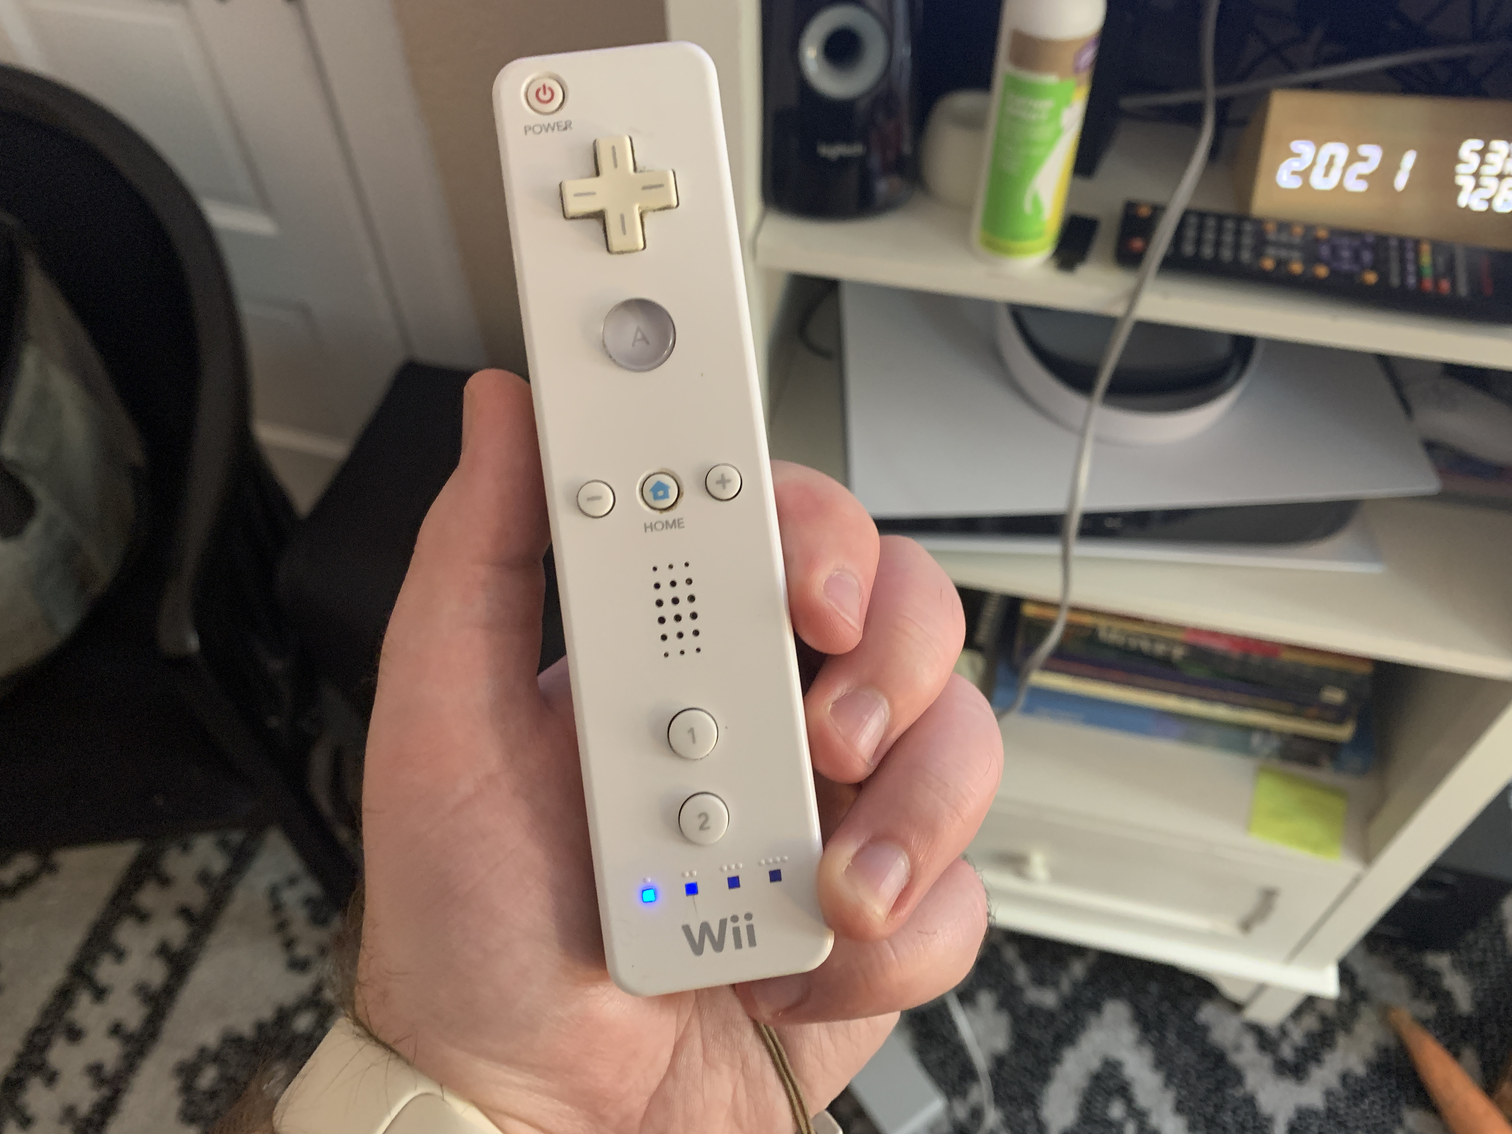 Lucky Premedicatie ze How to sync a Wii Remote to a Wii, Wii U, or PC